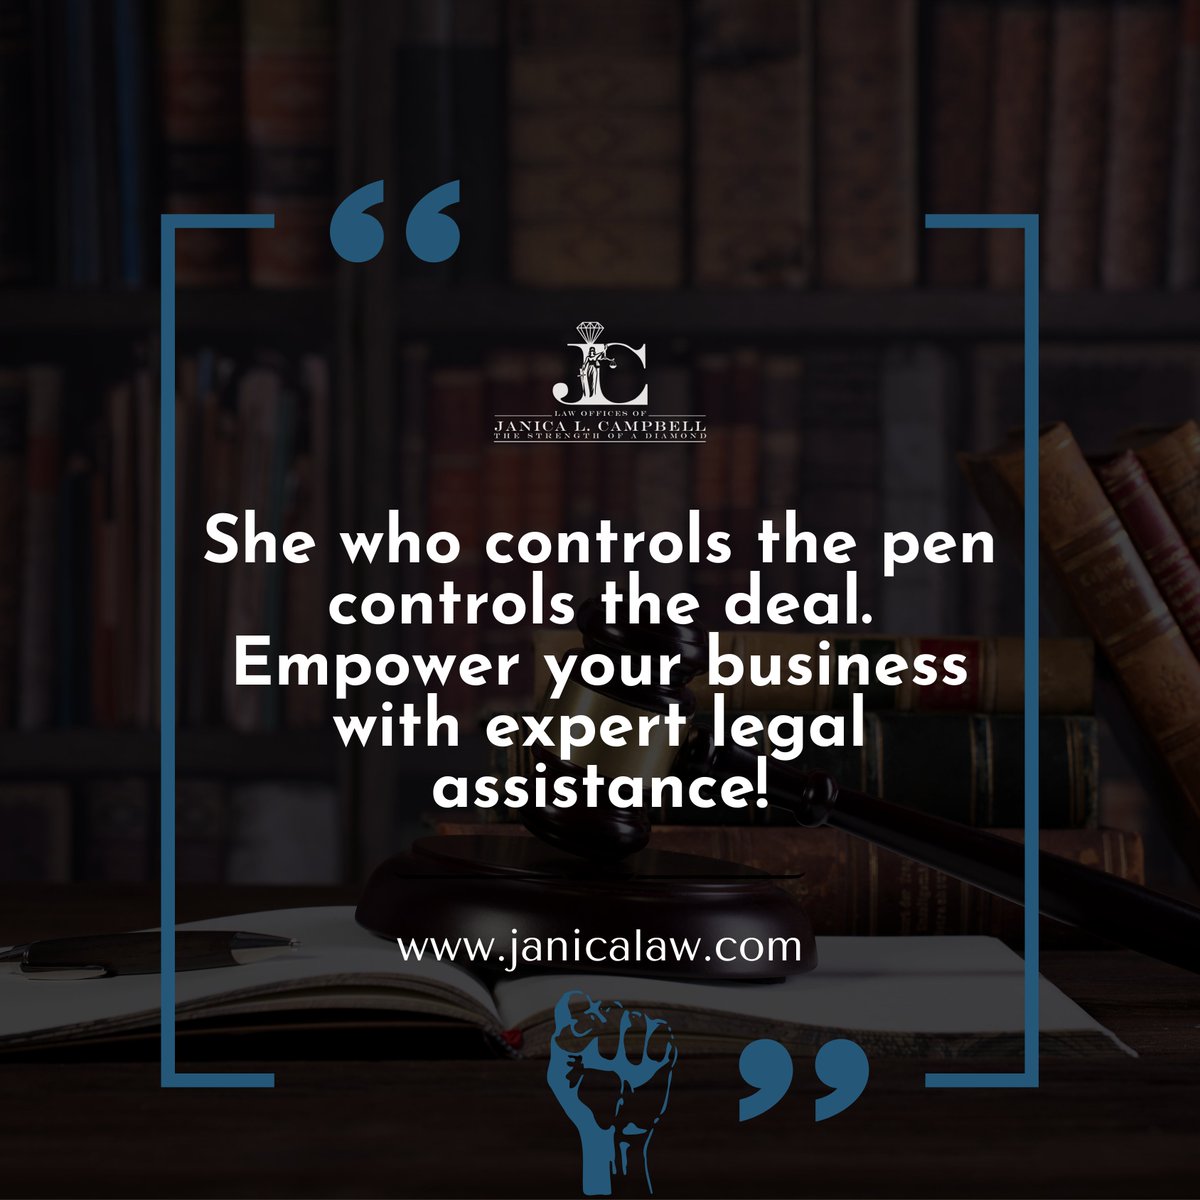 ✨ She who controls the pen controls the deal. Empower your business with expert legal assistance! ✨

#LegalAdvice #BusinessLaw #Entrepreneurship #WomenLeadership #BusinessEmpowerment #FemaleEntrepreneur #LegalSupport #BusinessGrowth #LegalAdvice #JanicaLaw #AttorneyAtLaw